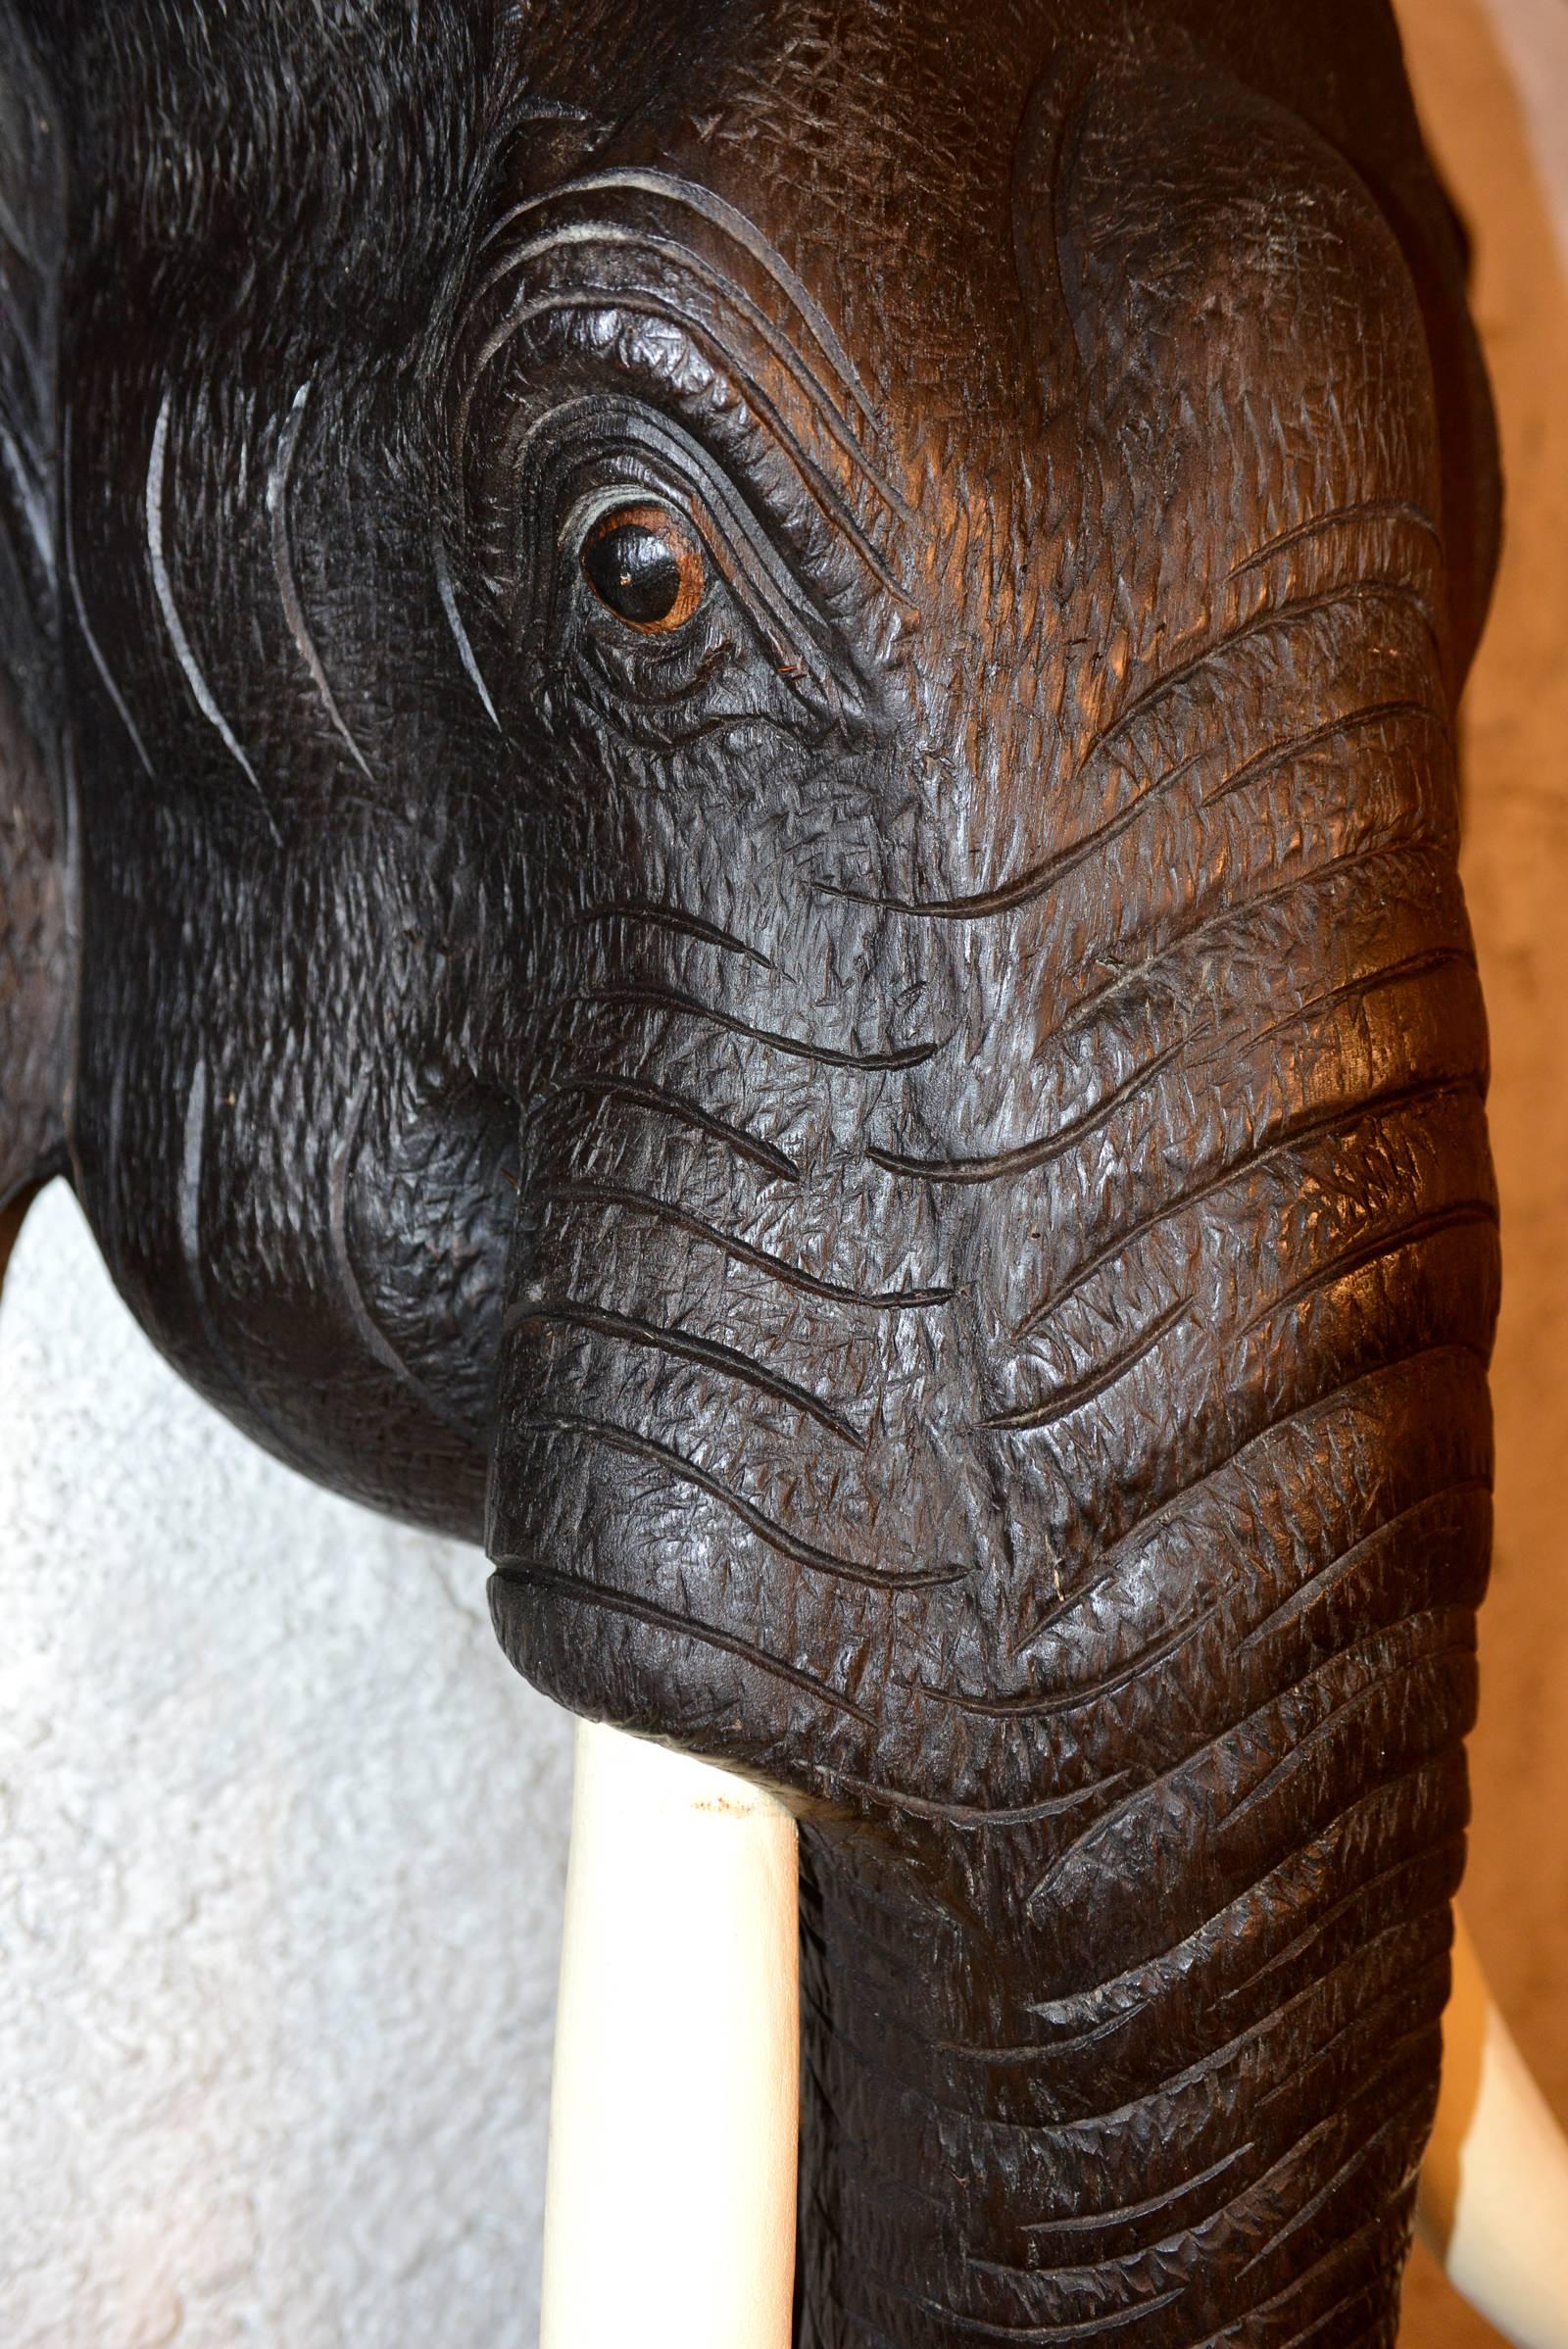 Hand-Carved Elephant Head Sculpture in Waxed Teak Wood from Indonesia